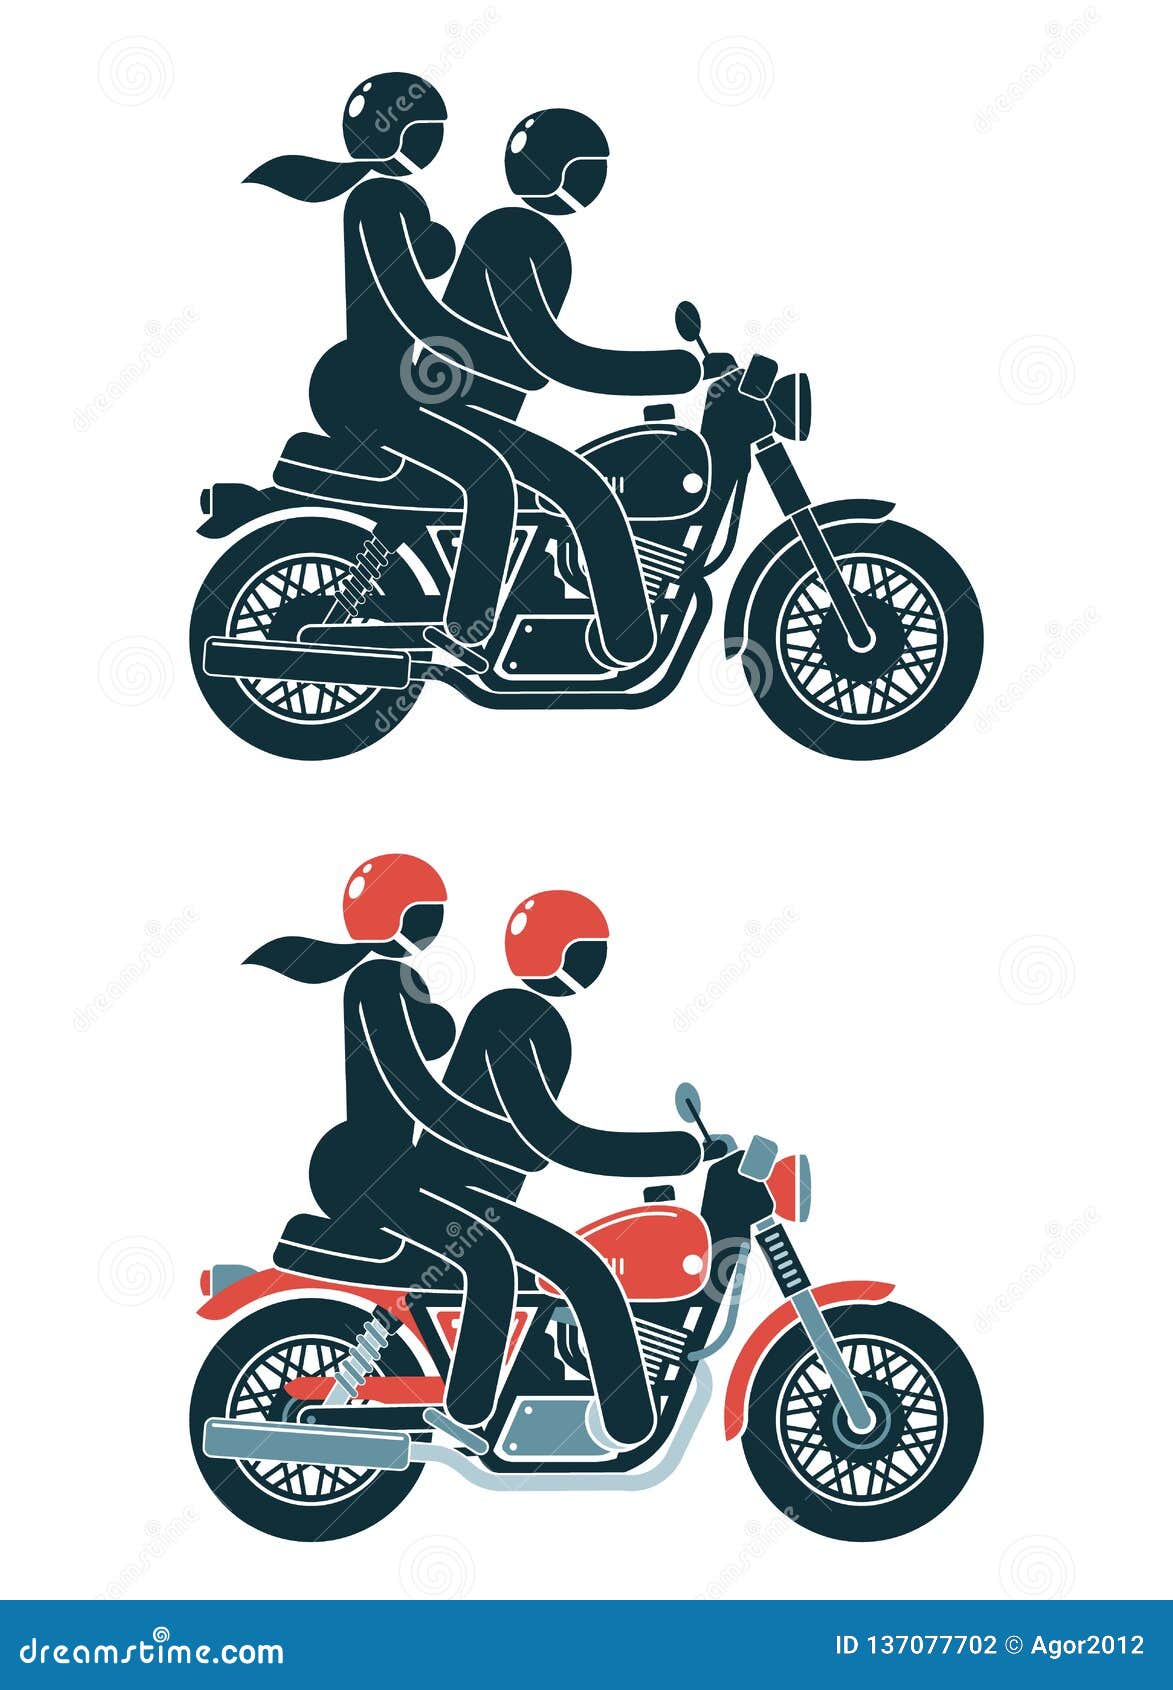 motorcyclist with a passenger girl on a classic motorcycle